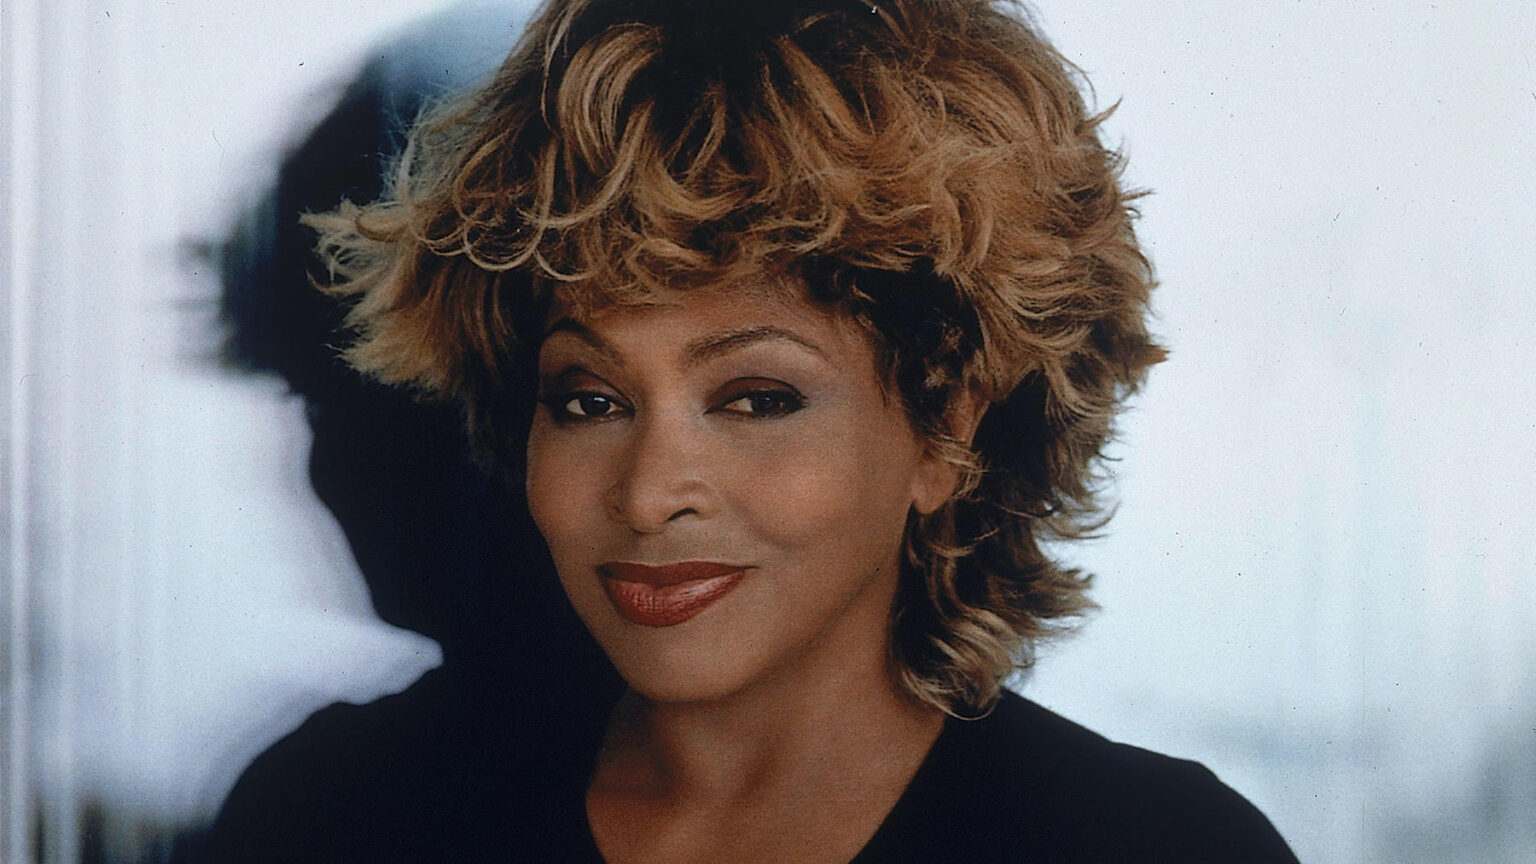 How has Tina Turner transformed her life from her separation from Ike Turner to now? Check out her history in the new docuseries 'Tina' on HBO Max.